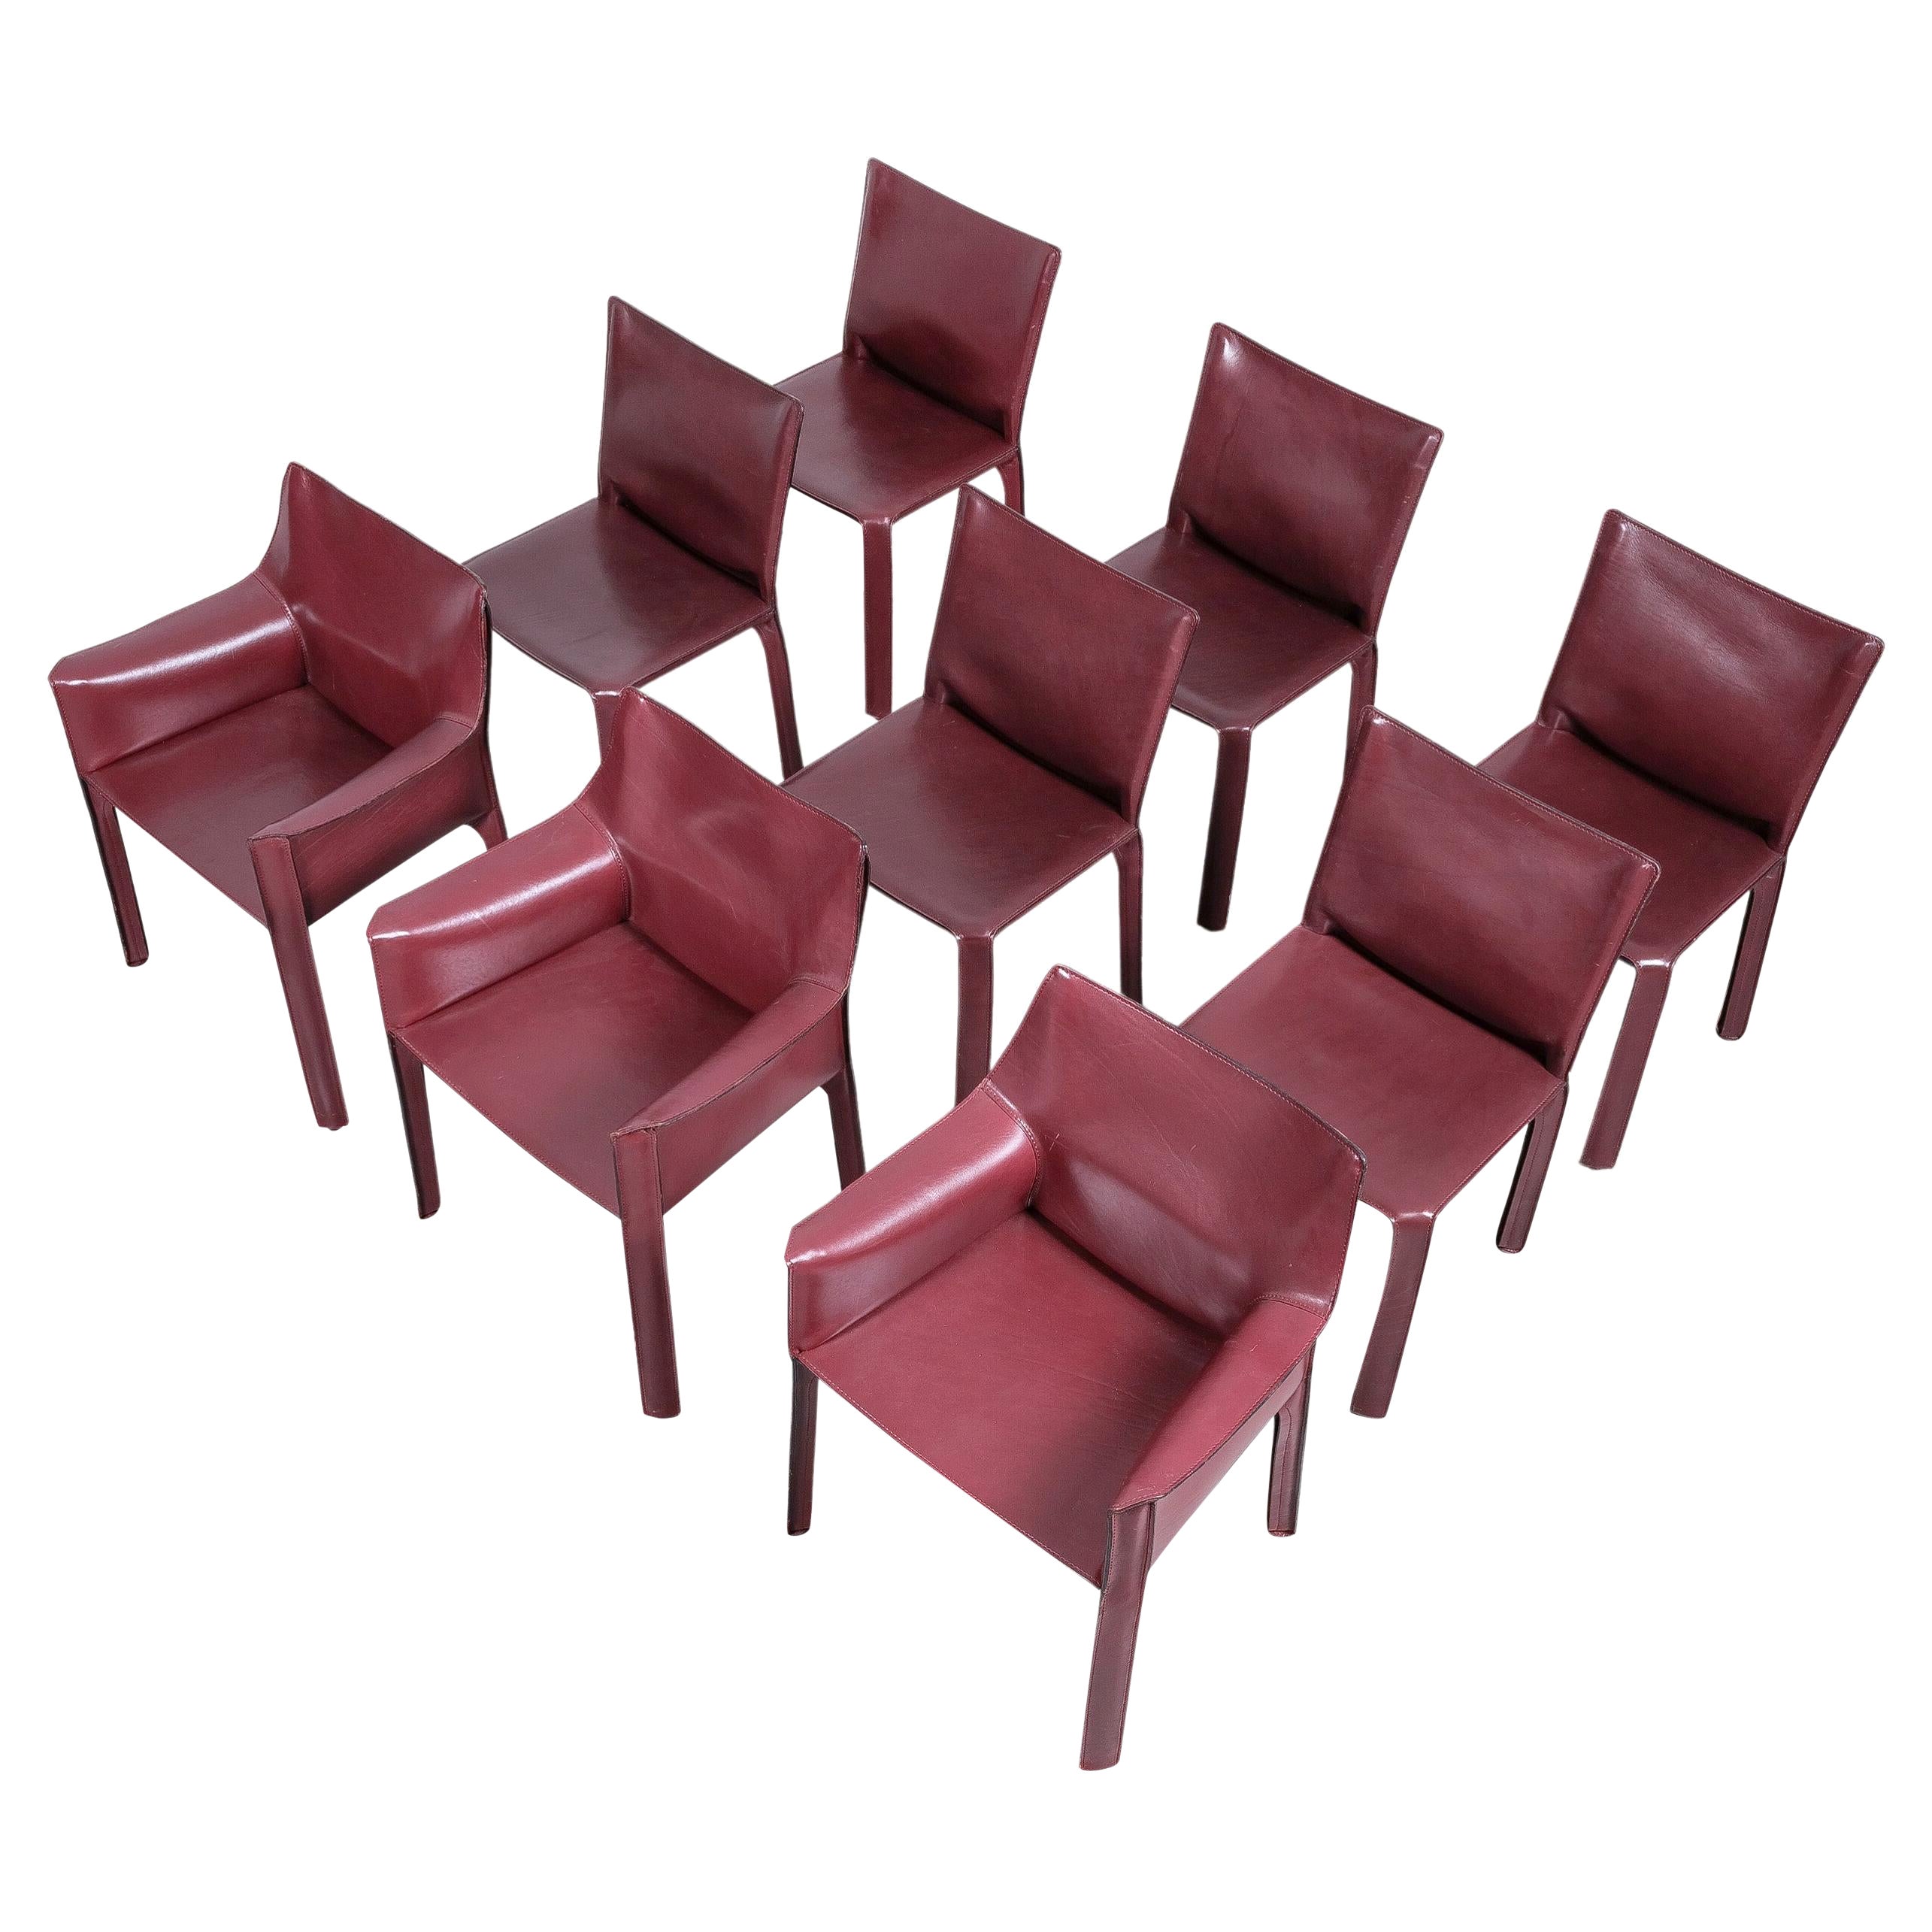 Mario Bellini Cassina Cab 412, 413 Set of Ten 9 Red Leather Dining Chairs